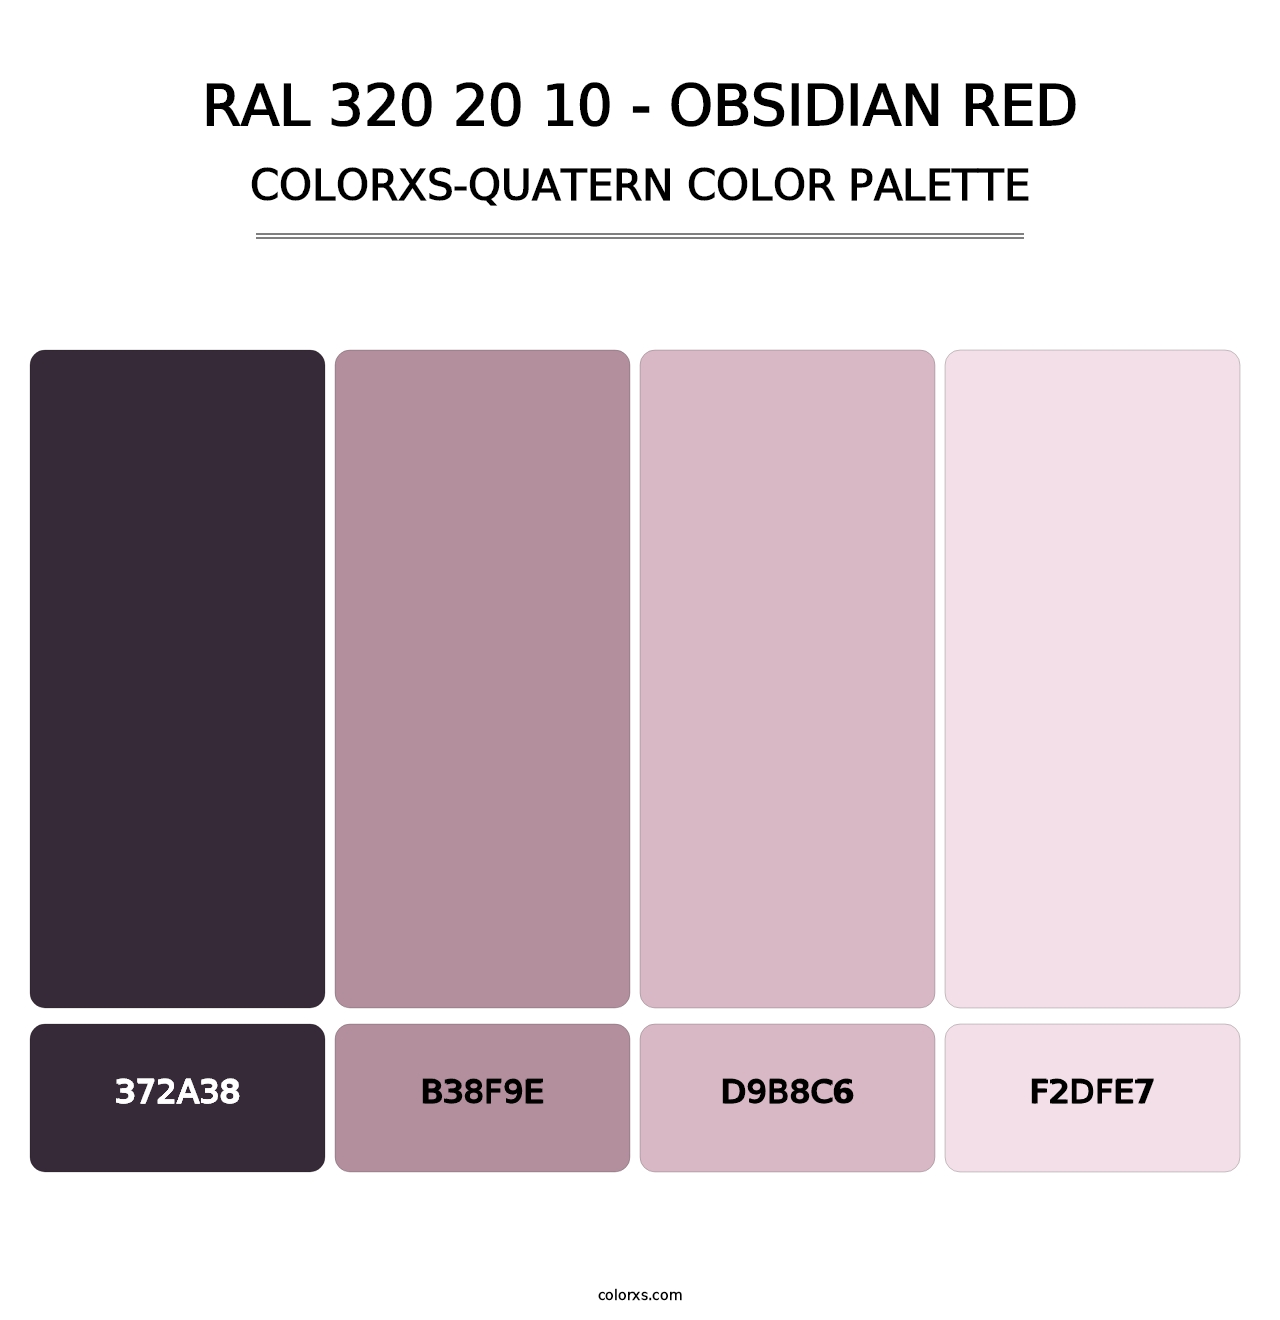 RAL 320 20 10 - Obsidian Red - Colorxs Quatern Palette